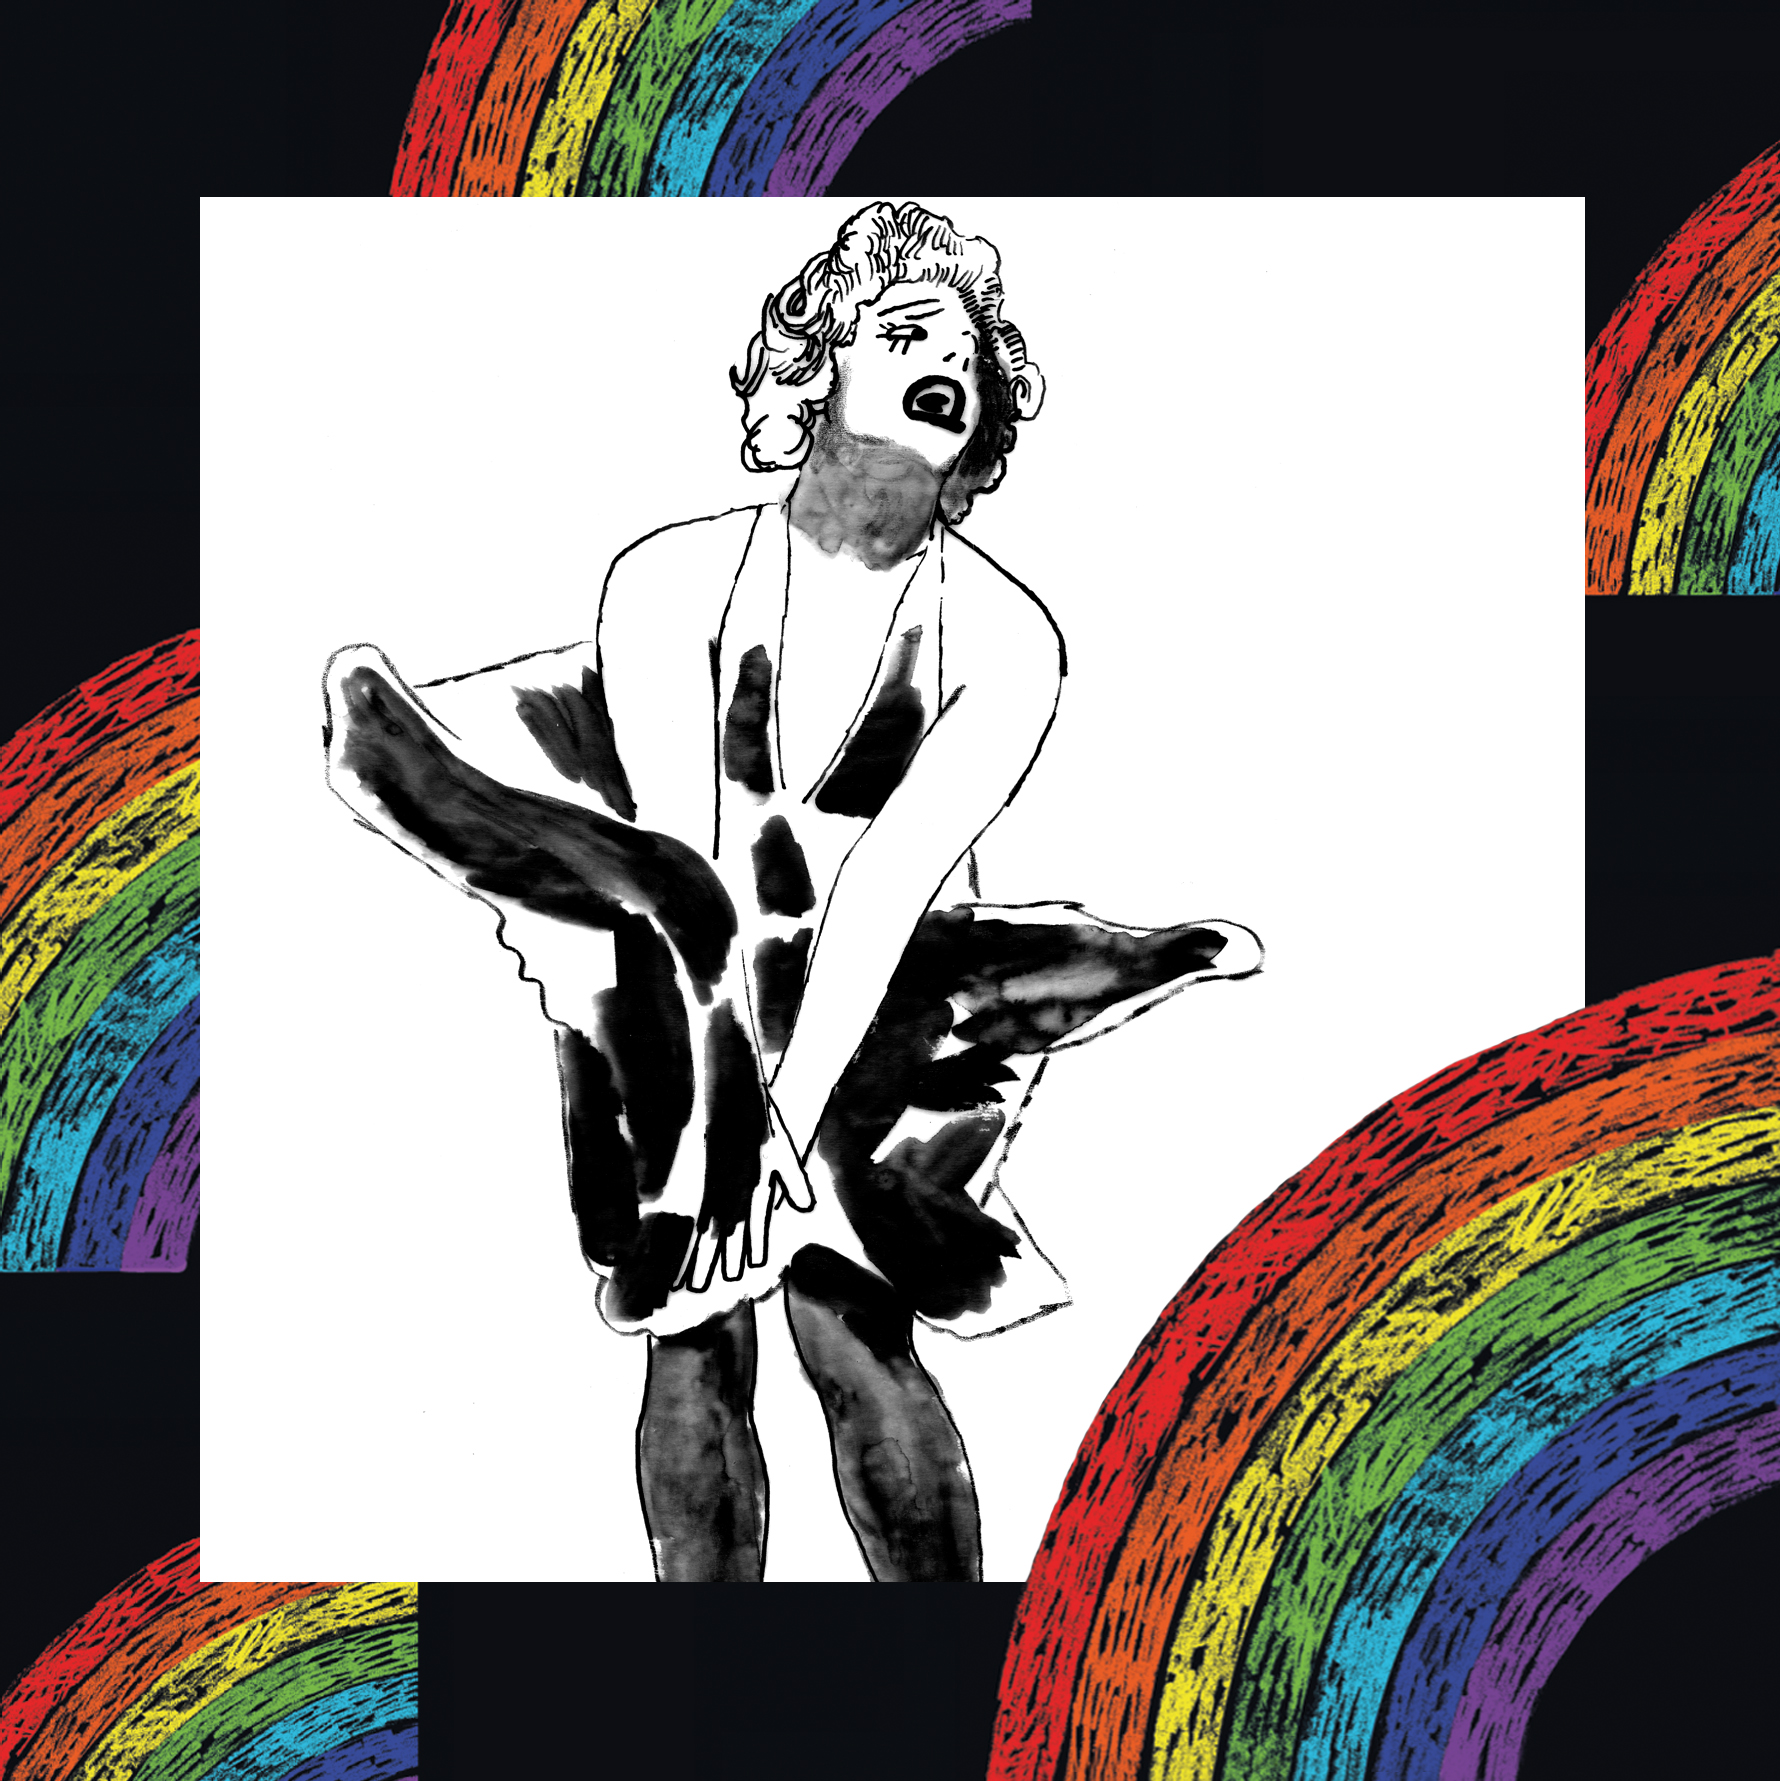 A black and white illustration of artist Dickie Beau dressed as Marilyn Monroe, holding down a white dress as it lifts in a gust of air. The illustration is layered on a black background with illustrated rainbows